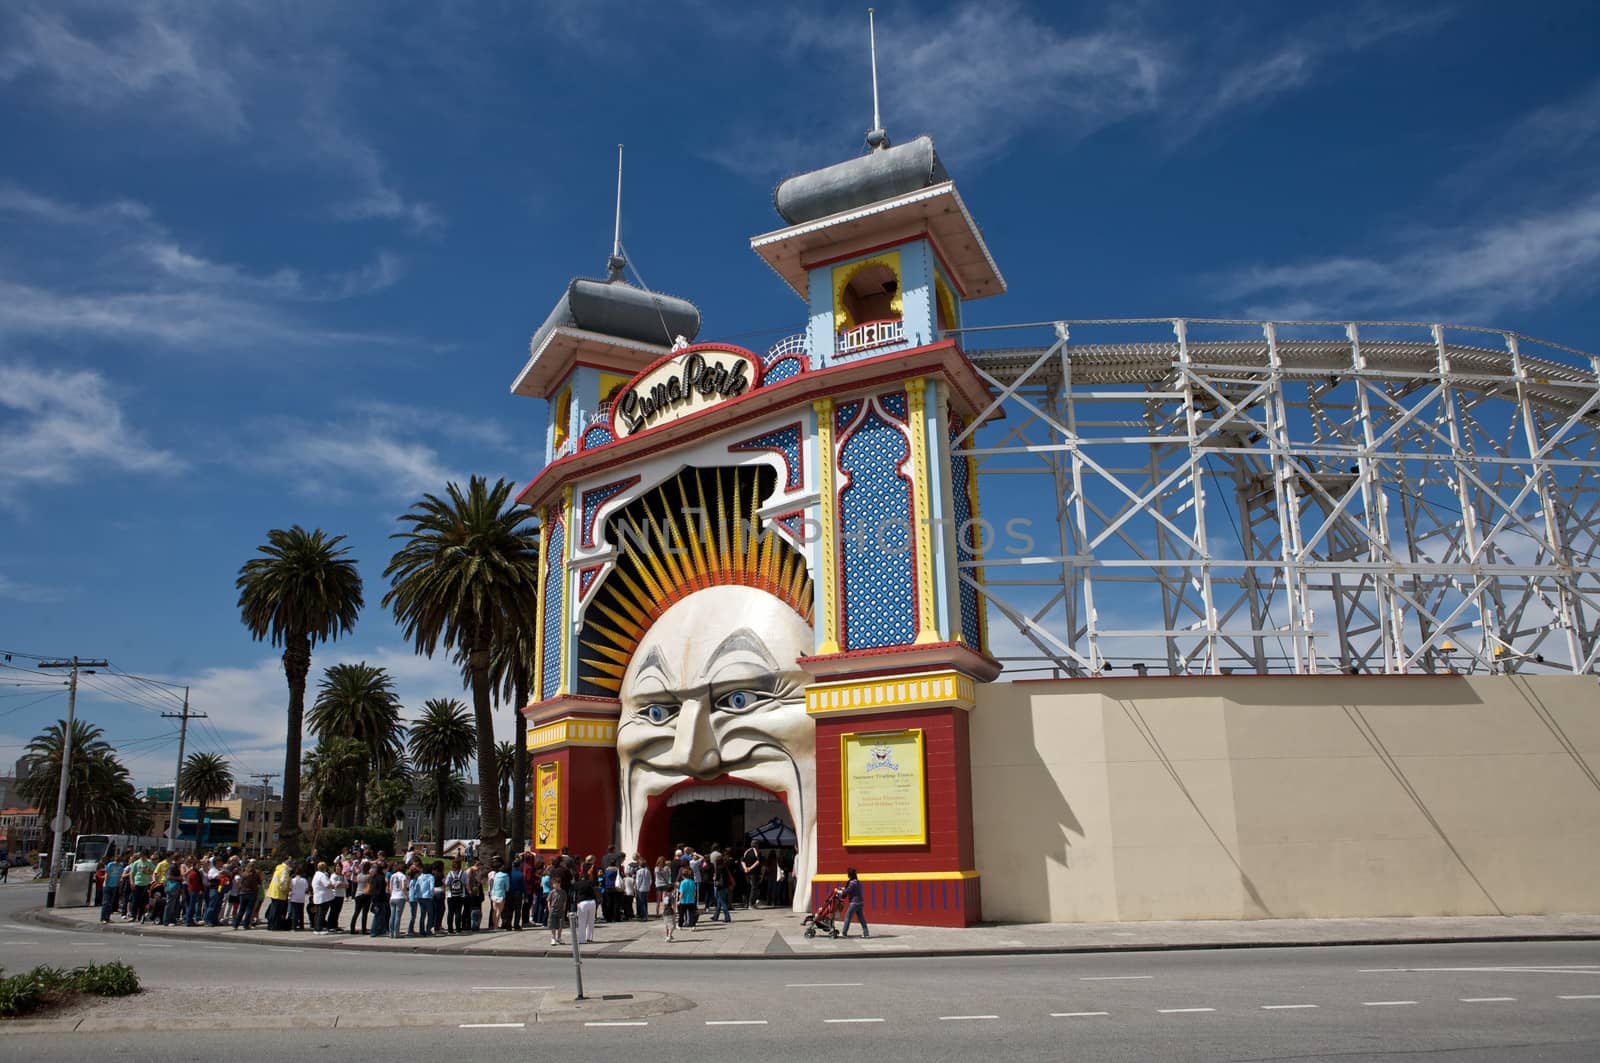 Luna Park in Melbourne and Sydney, Australia.
Lunapark Entertaining Carrousel Rides During the Holidays